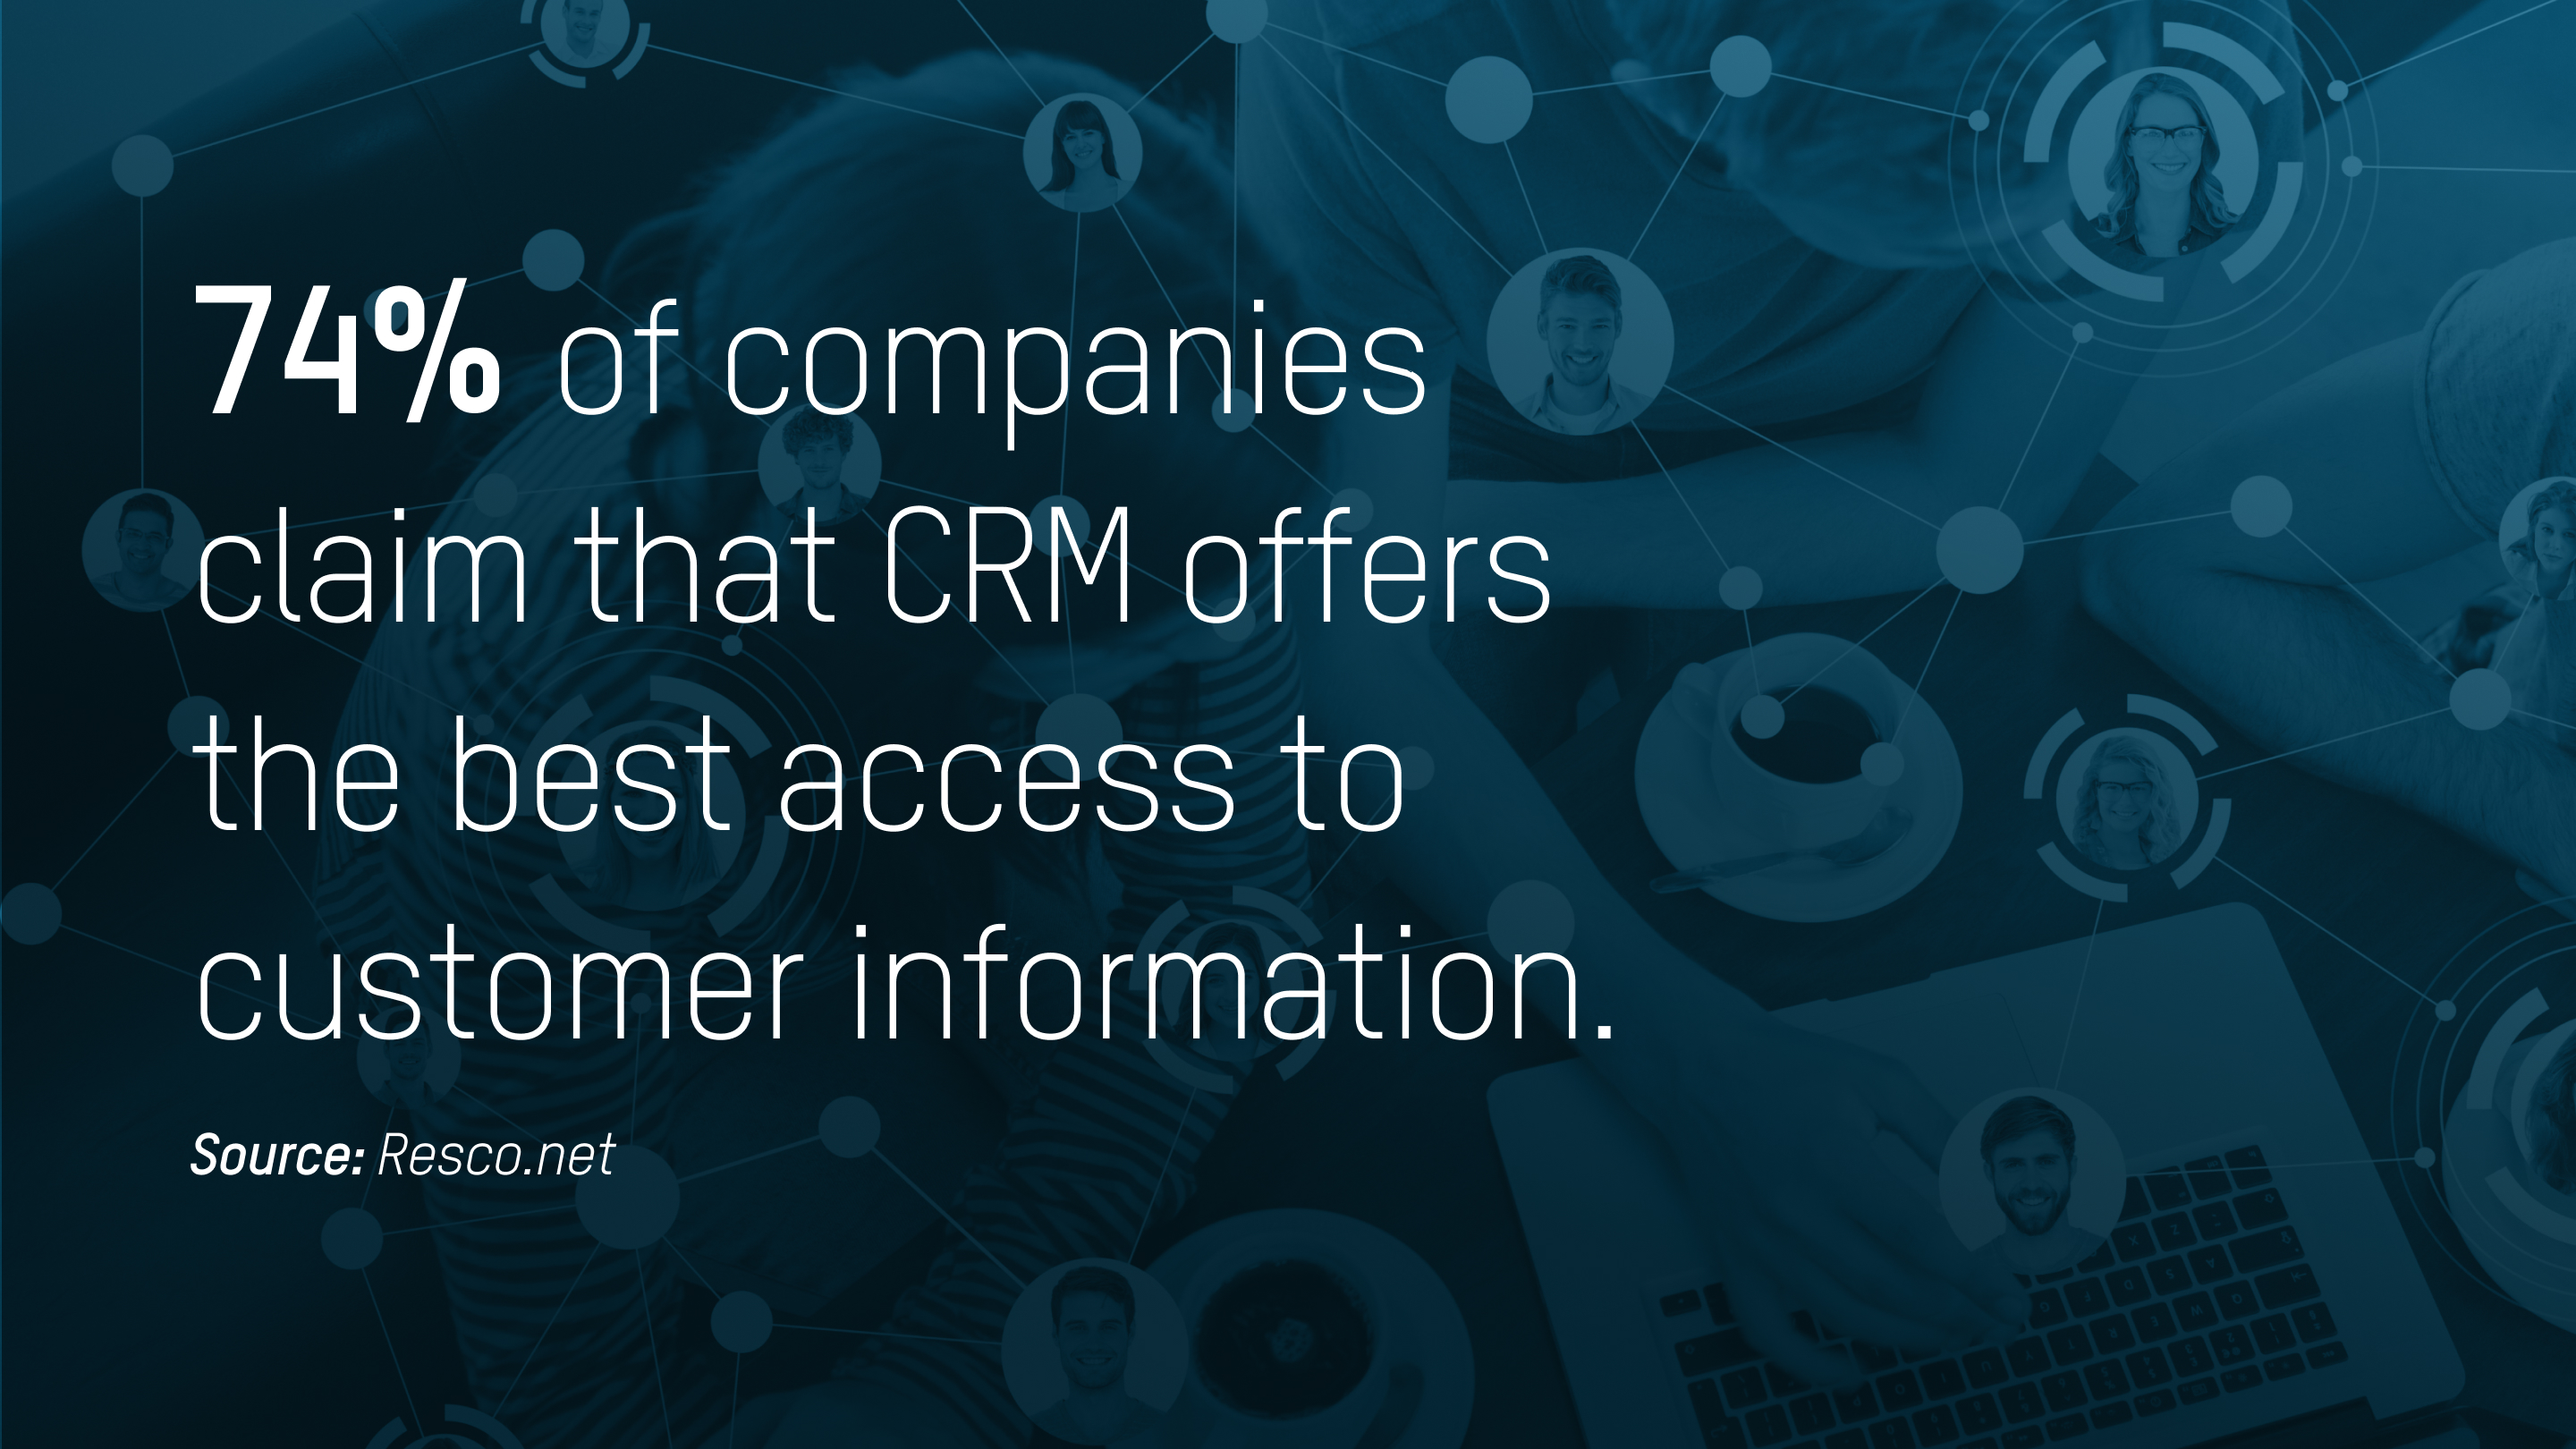 Companies claim that CRM offers the best access to customer information